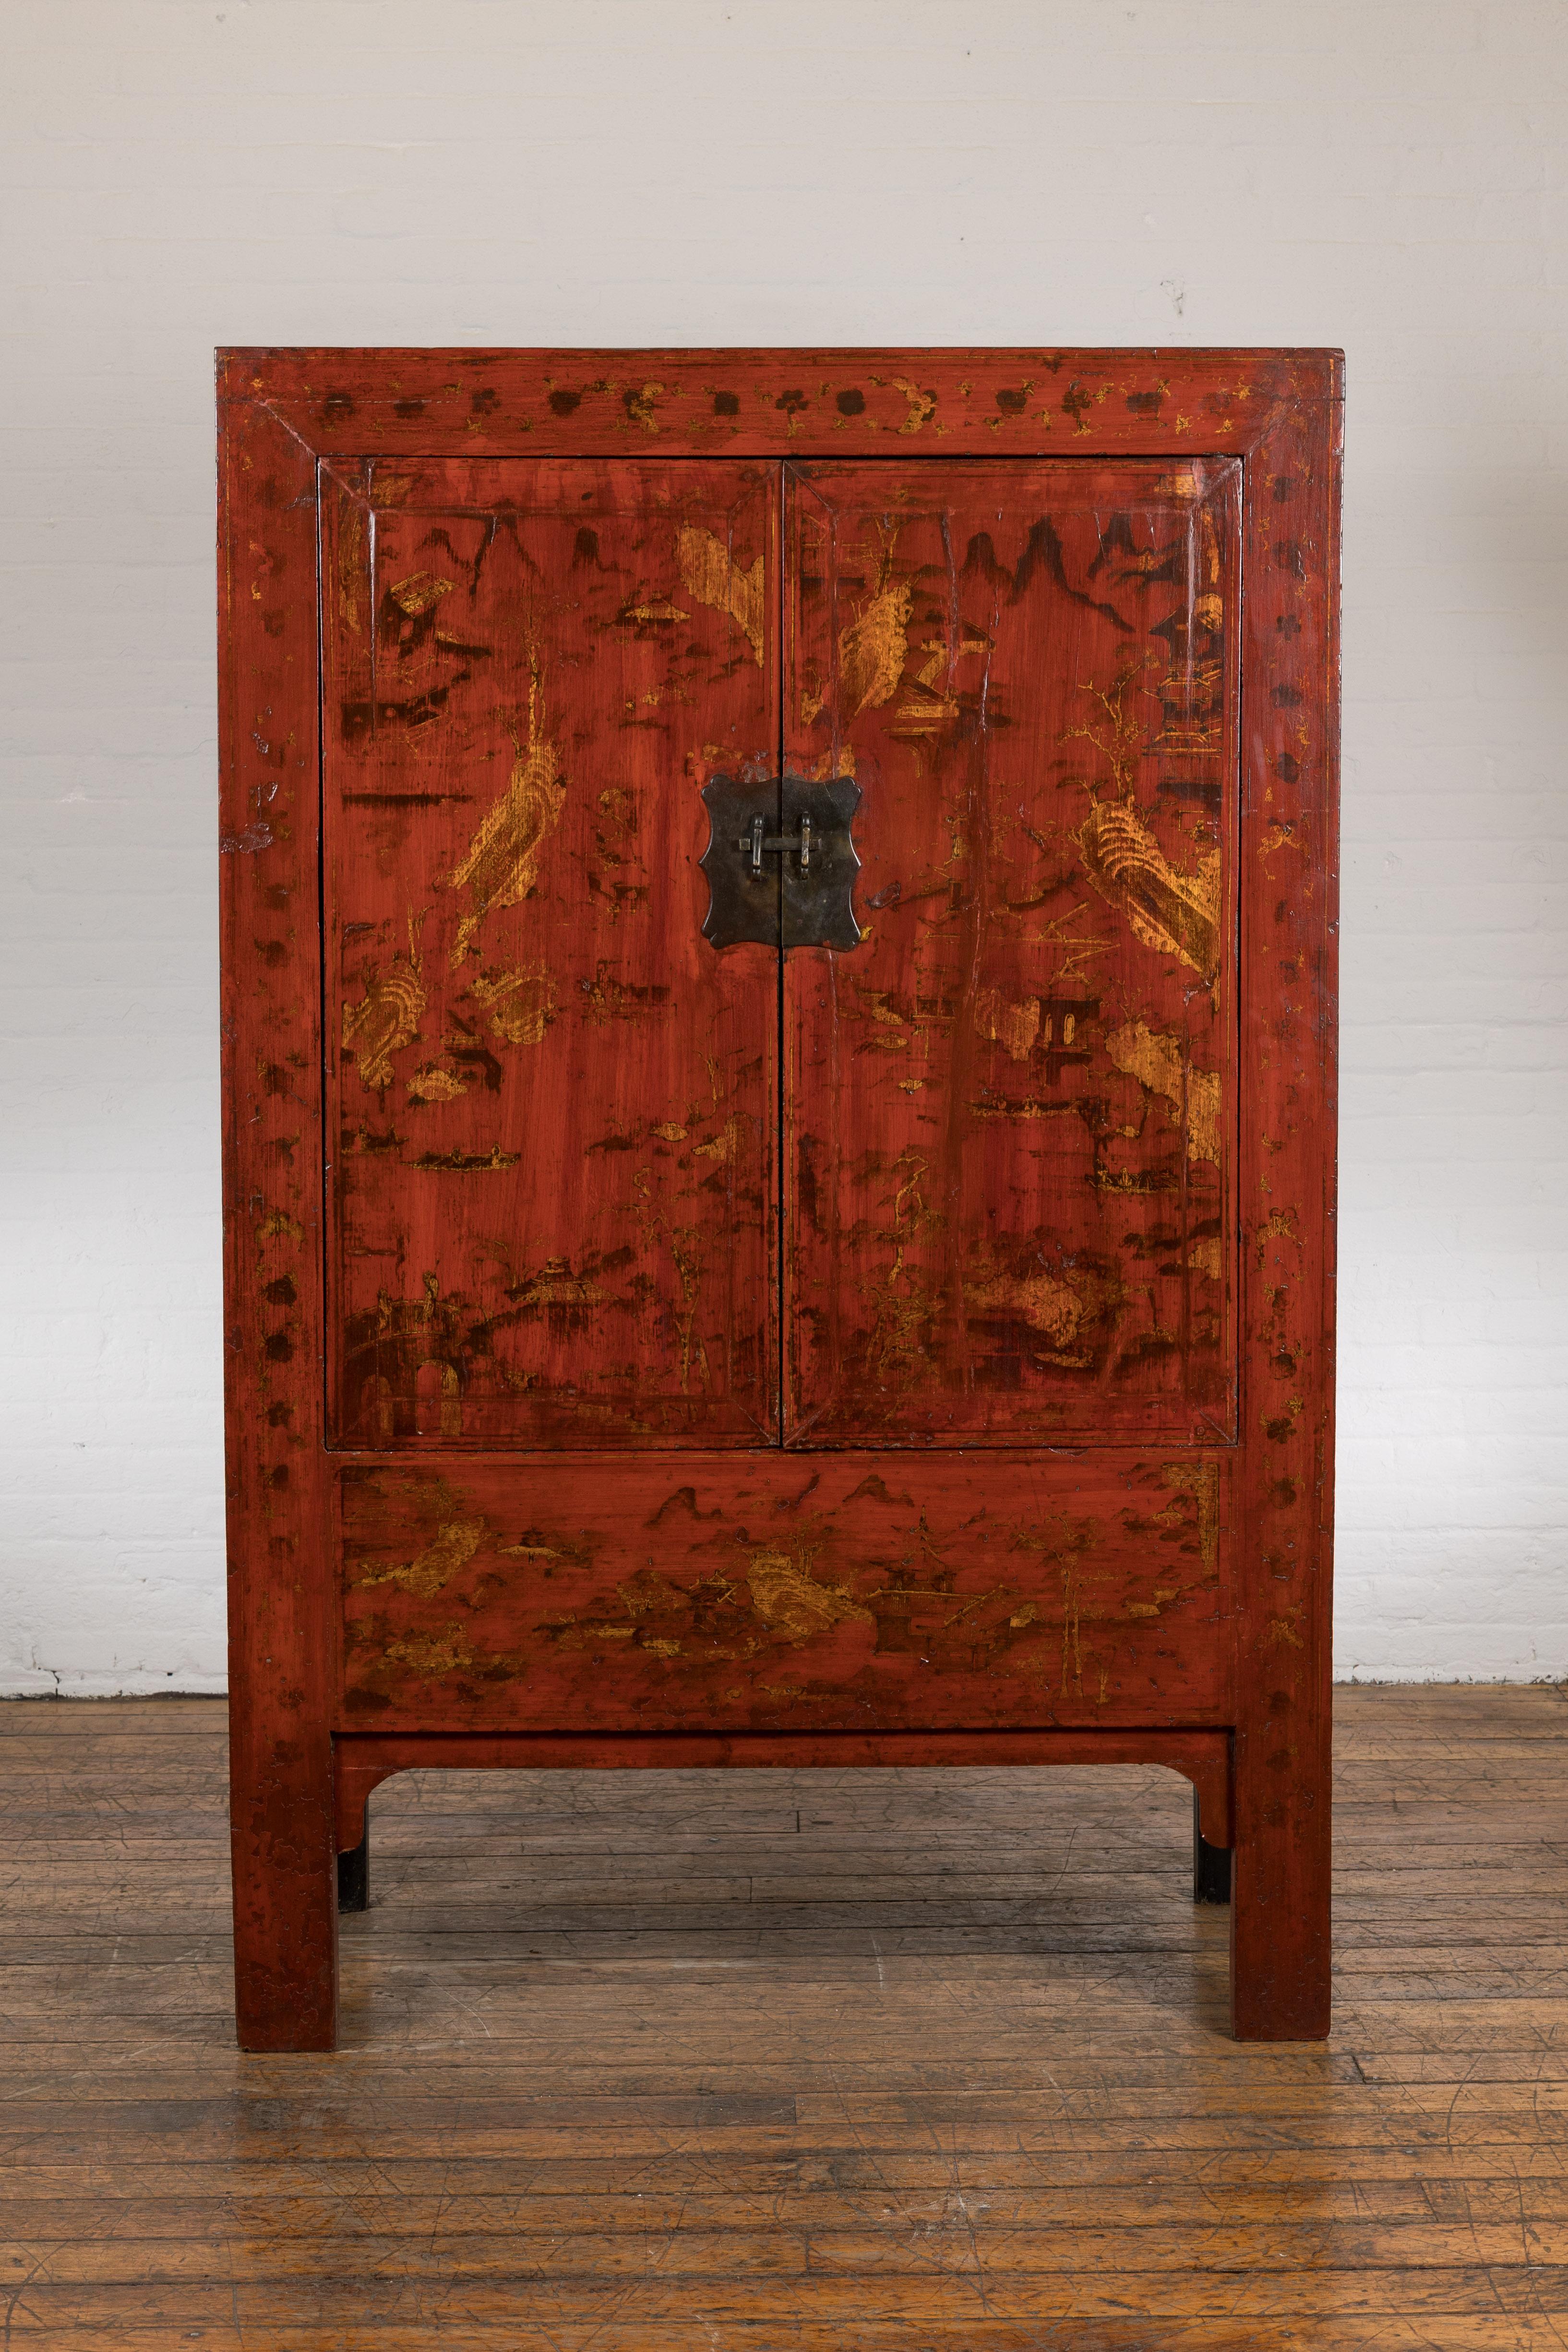 Qing Large Red Antique Cabinet with Gold Painted Scenes